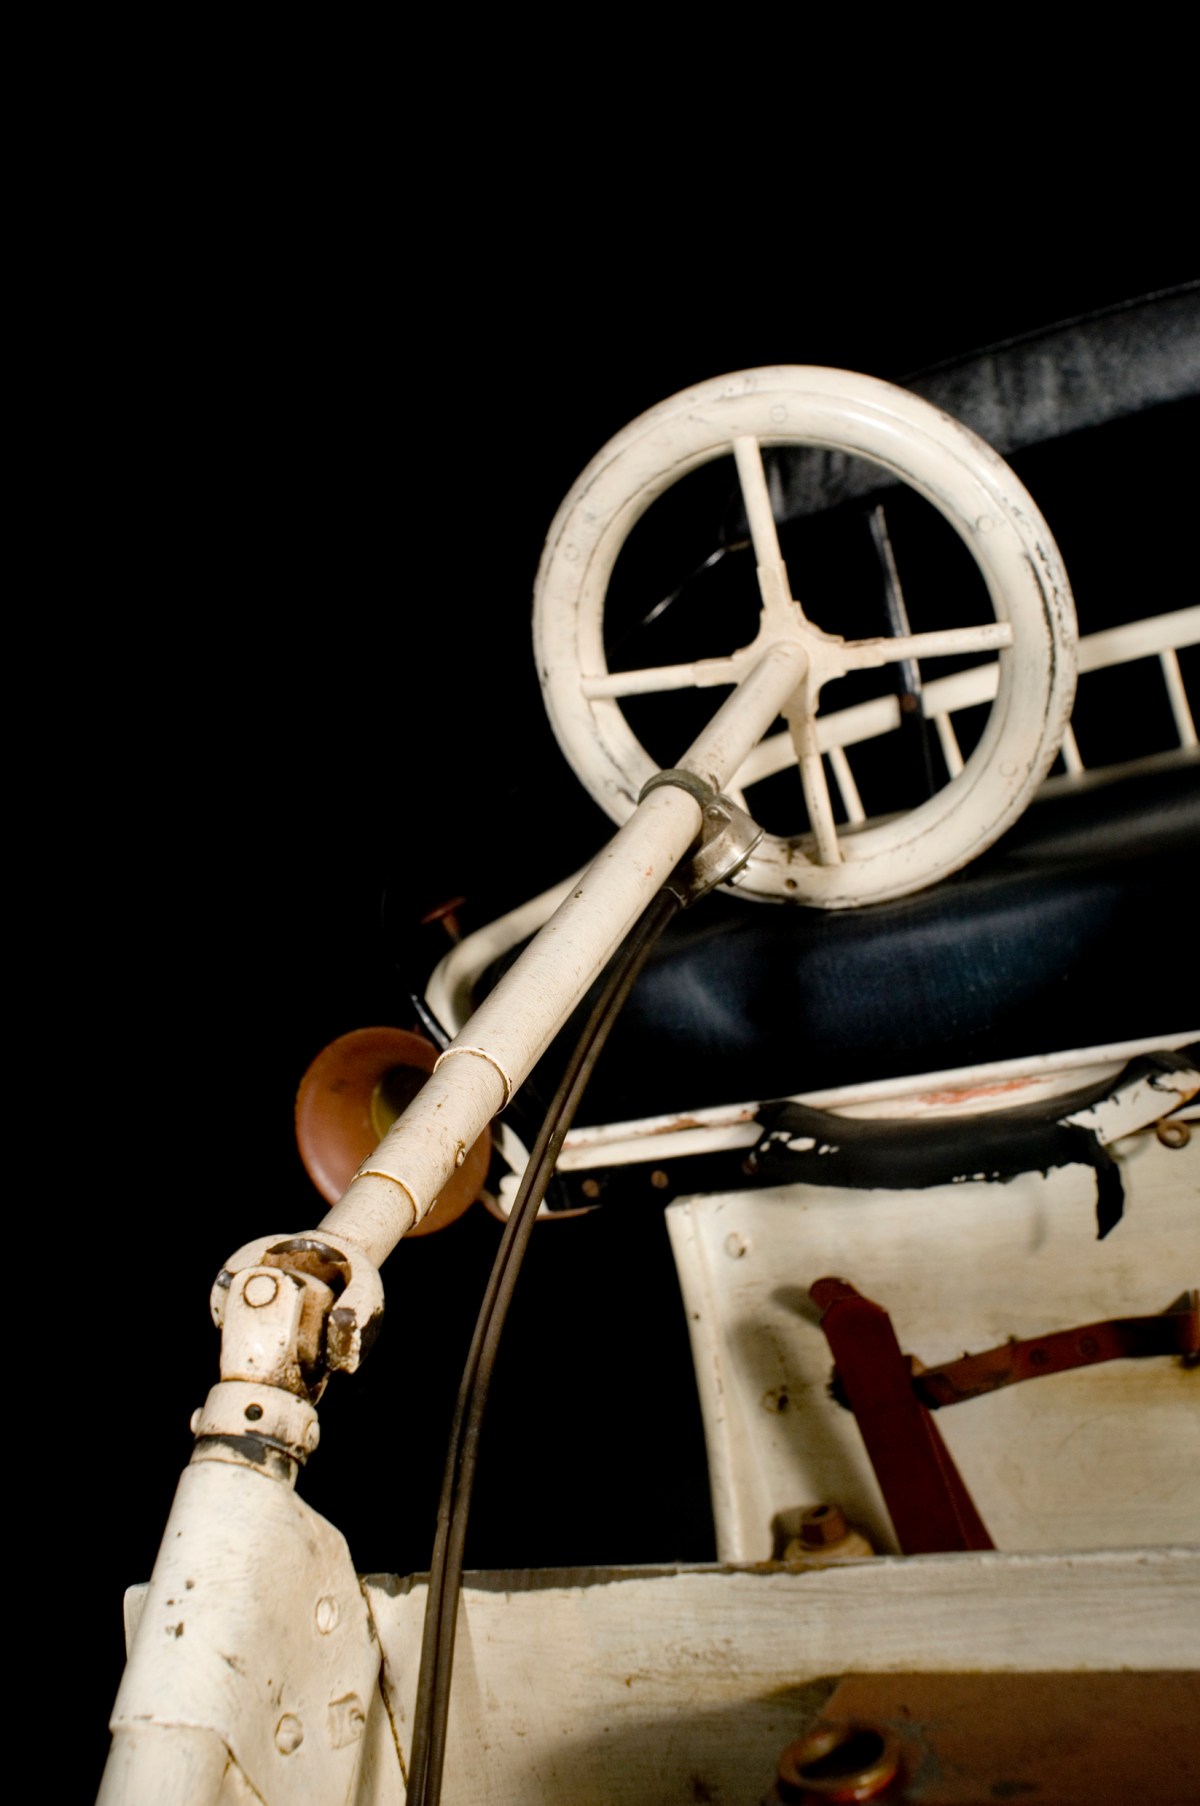 Detail of the articulated steering system.